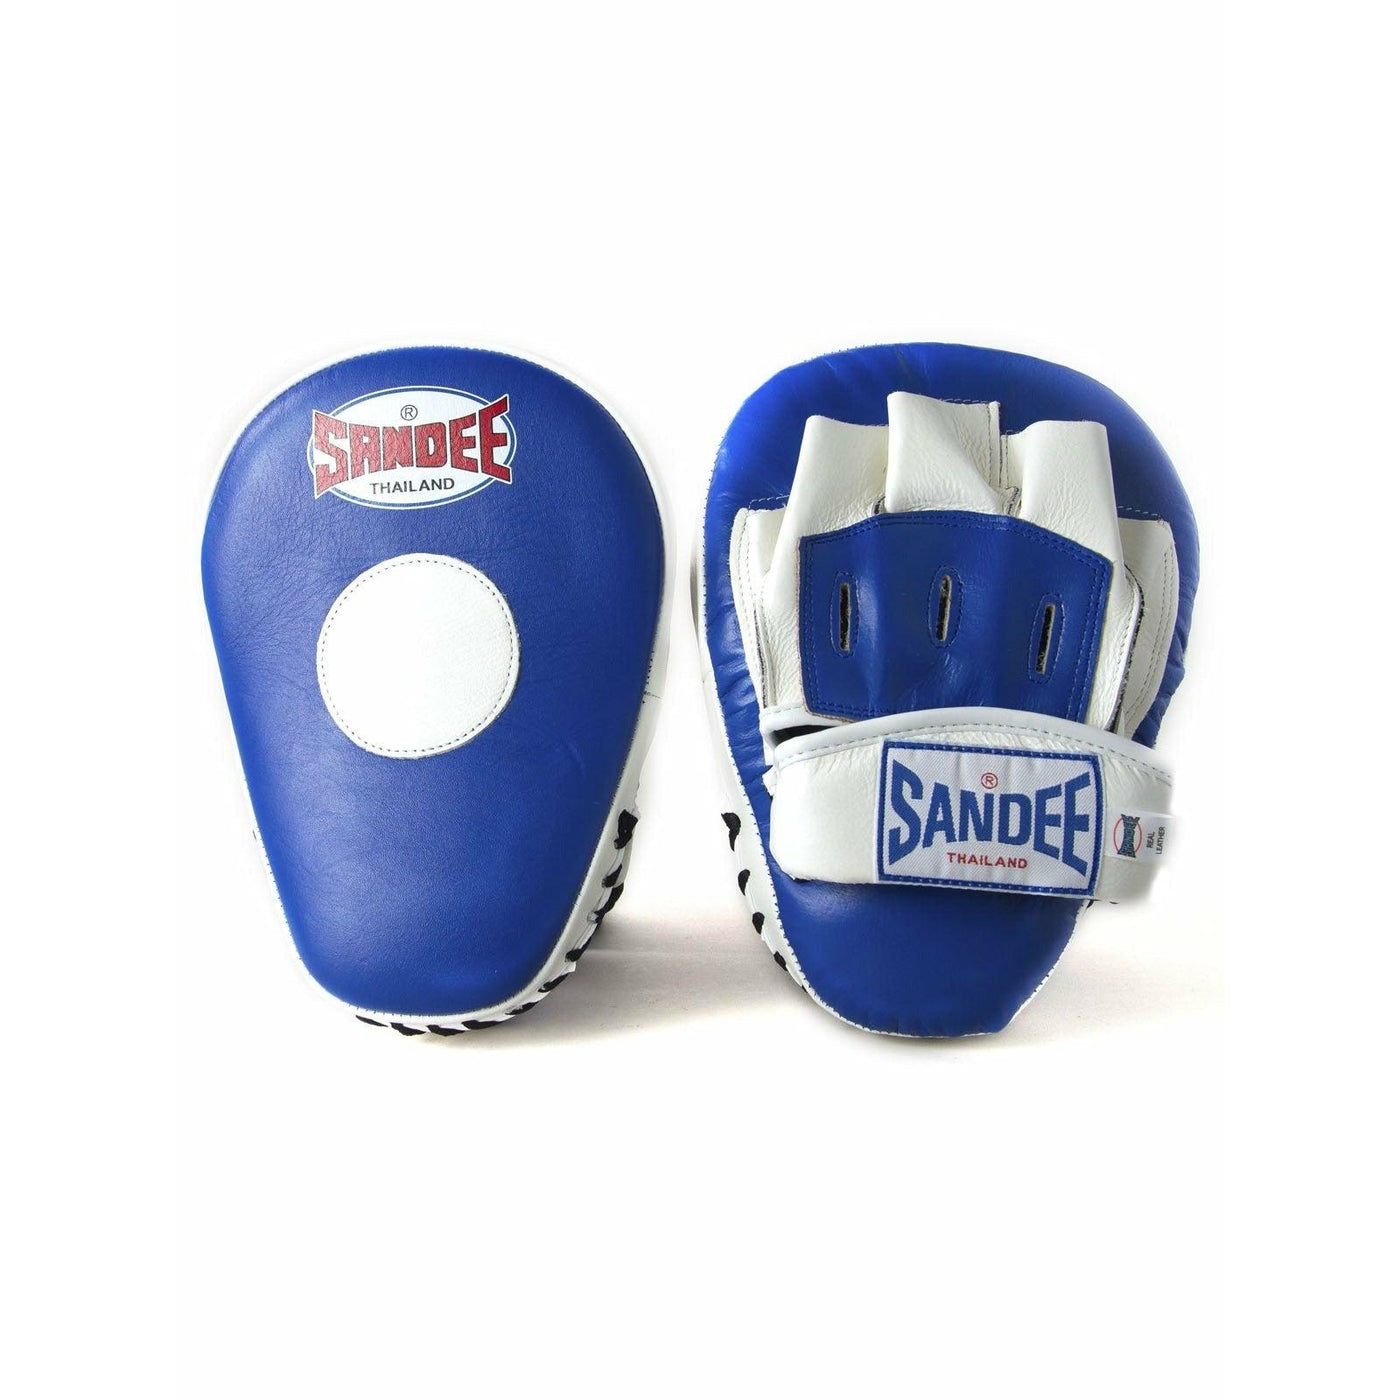 Sandee Curved Focus Mitts - Blue & White - Muay Thailand